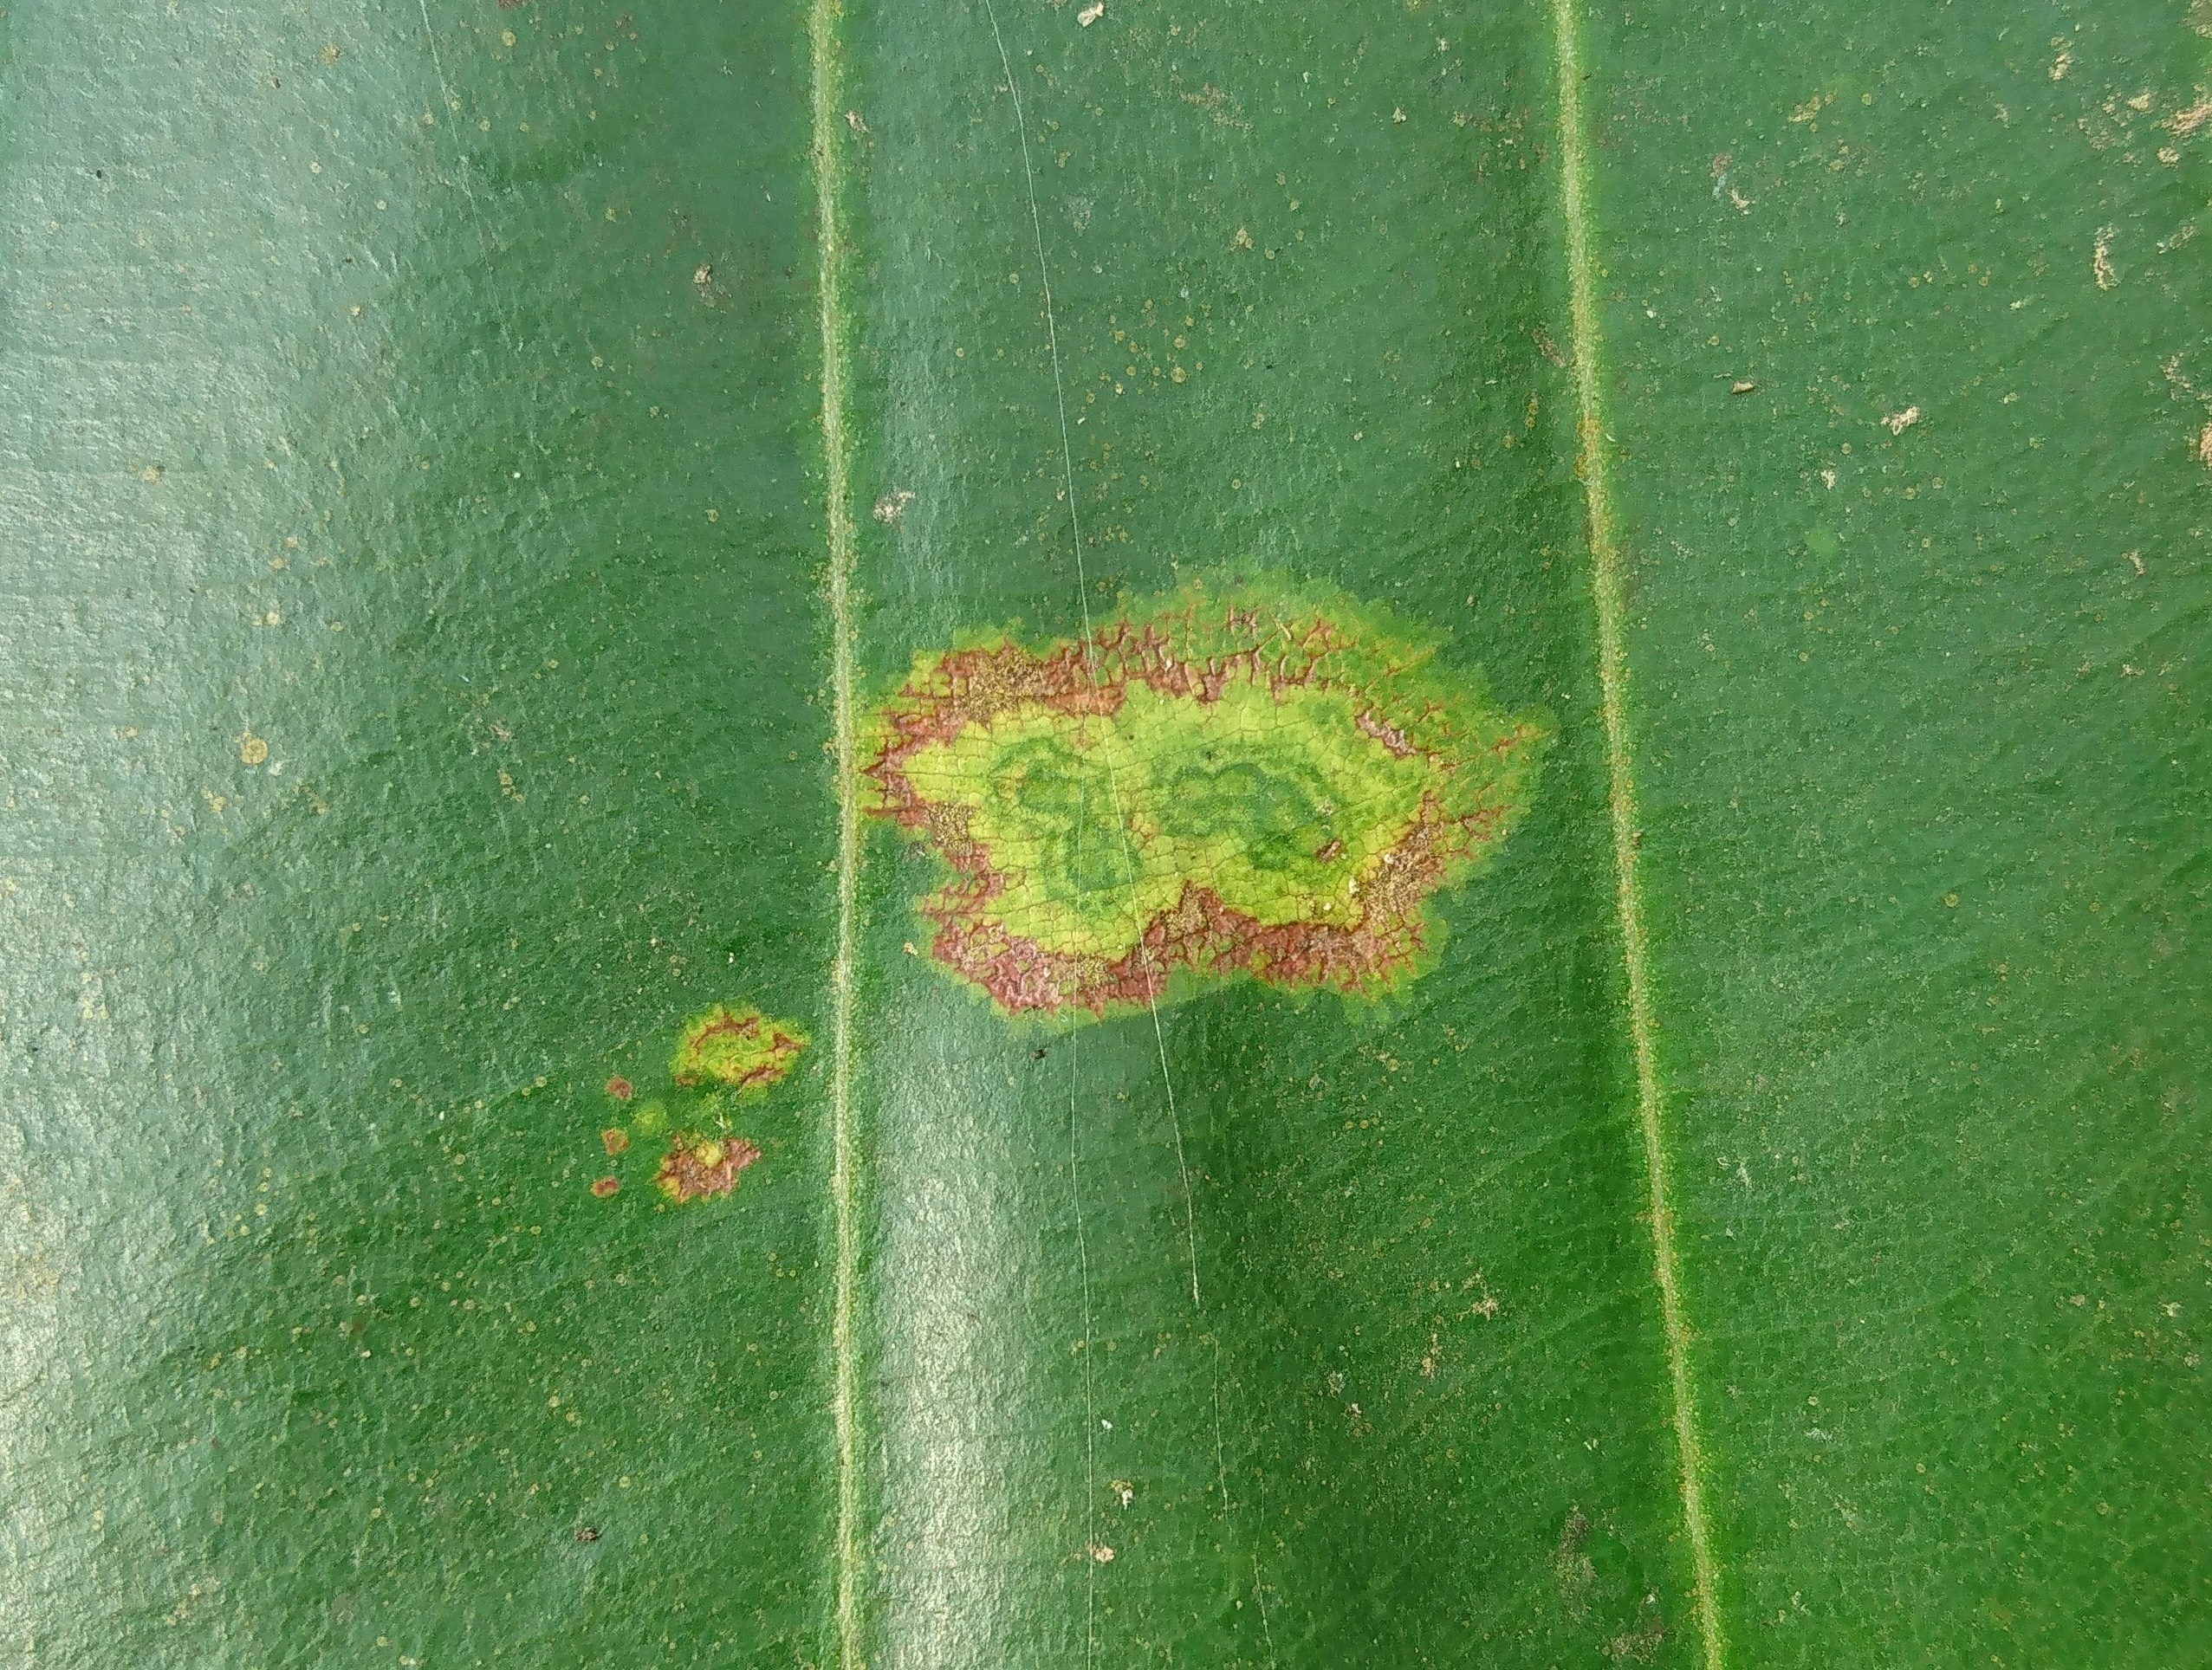 leaf with necrotic spot